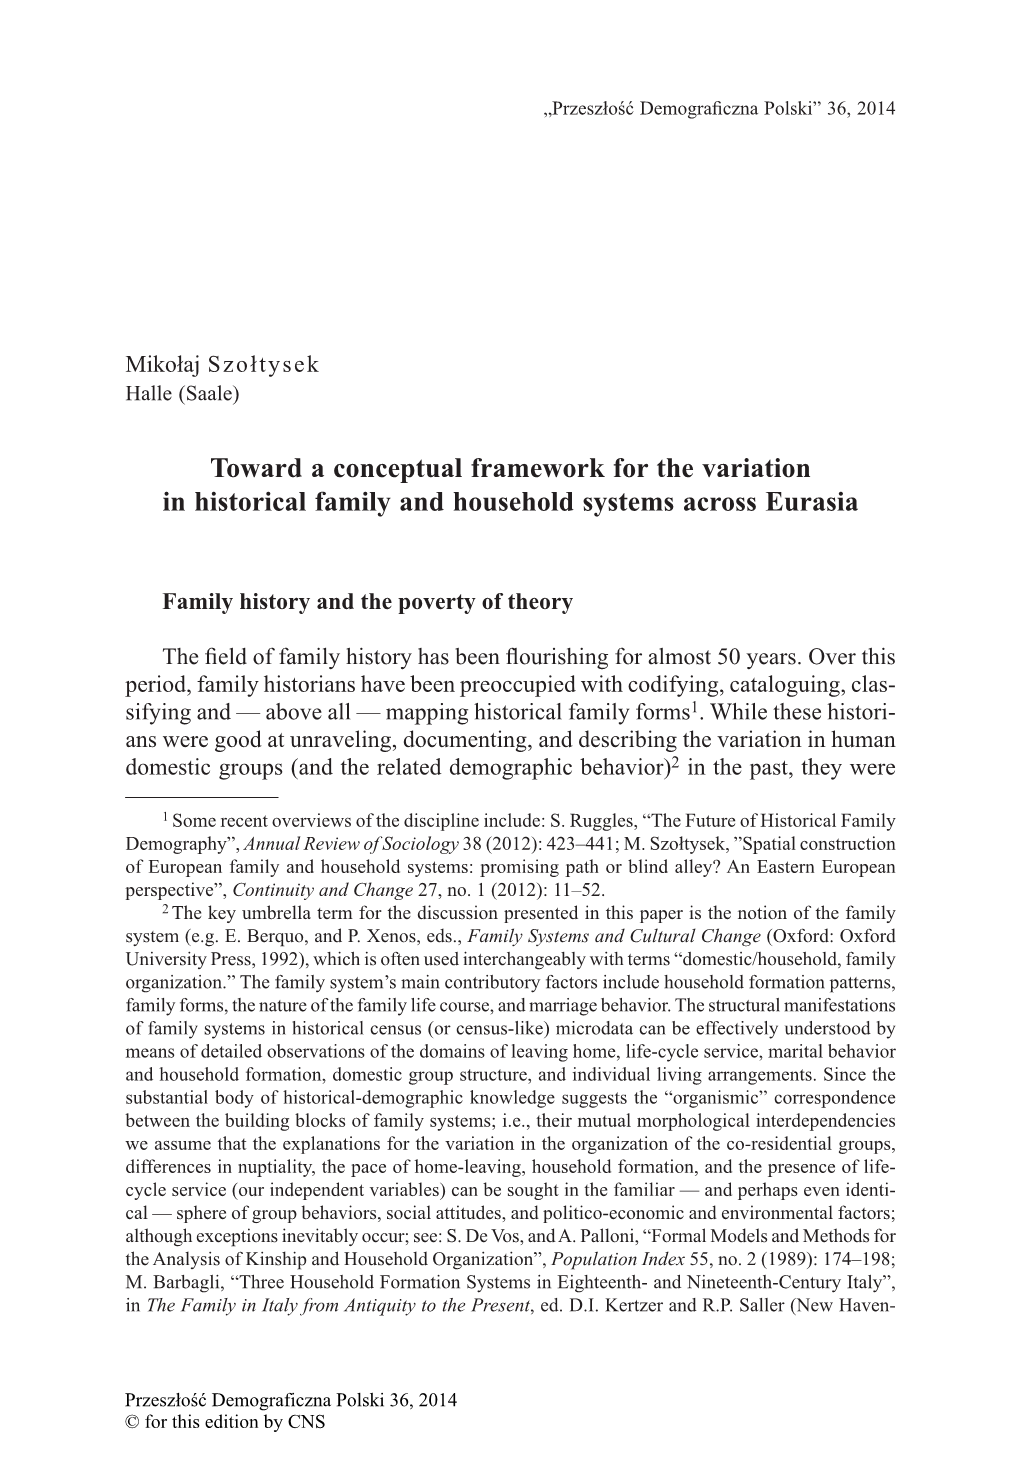 Toward a Conceptual Framework for the Variation in Historical Family and Household Systems Across Eurasia